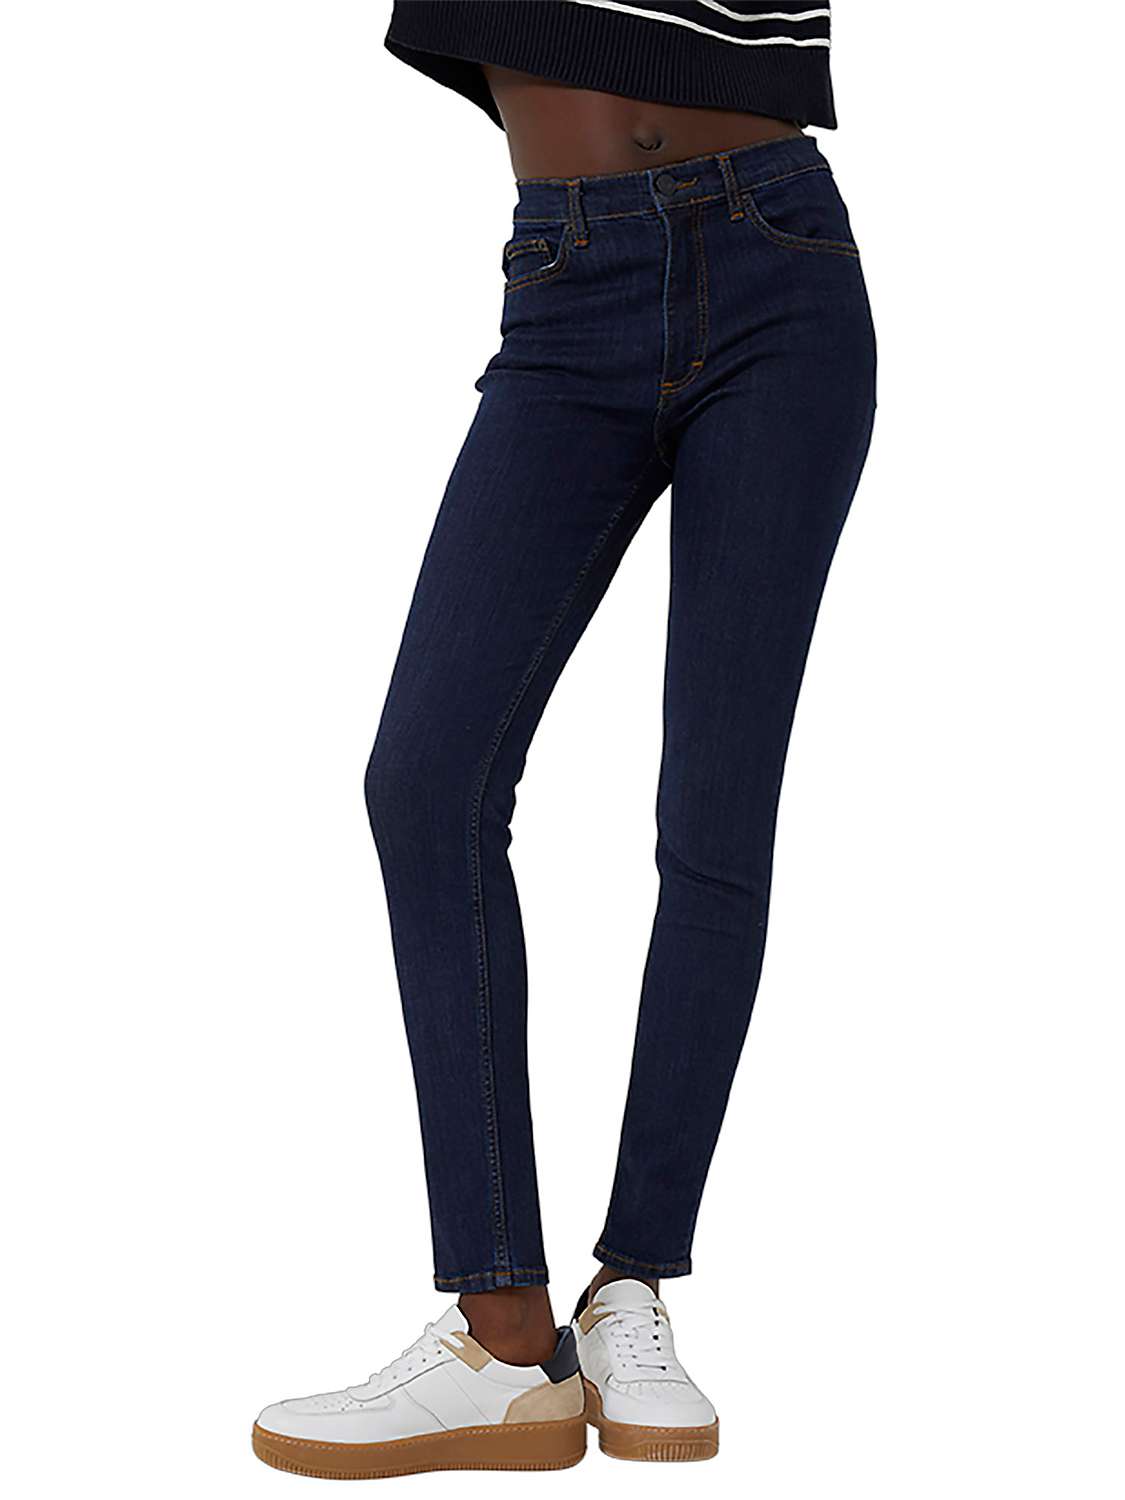 Buy French Connection Rebound Skinny Jeans, Dark Blue Online at johnlewis.com